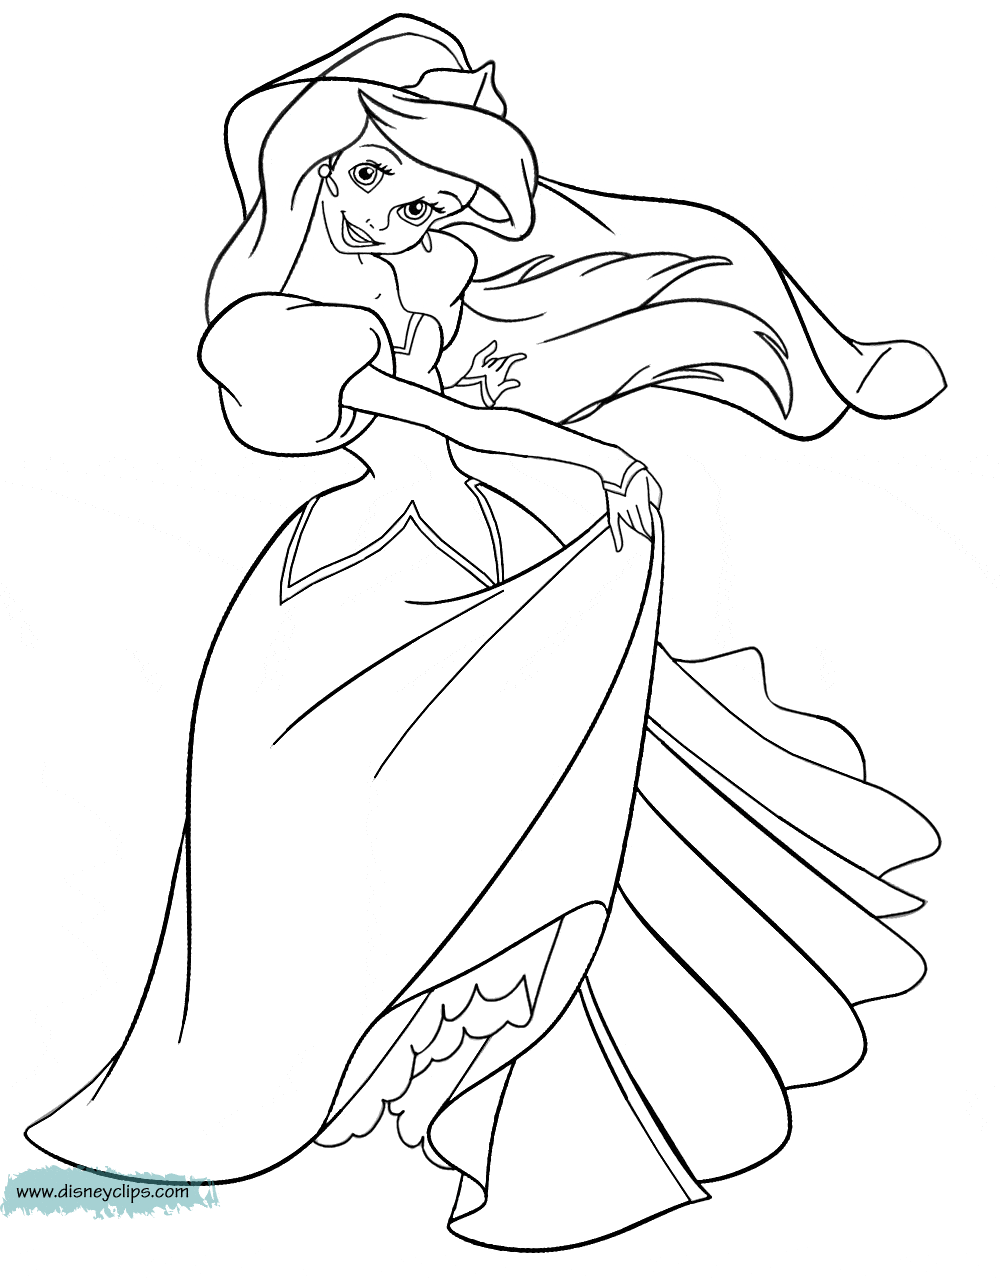 The Little Mermaid Coloring Pages (4) | Disneyclips.com